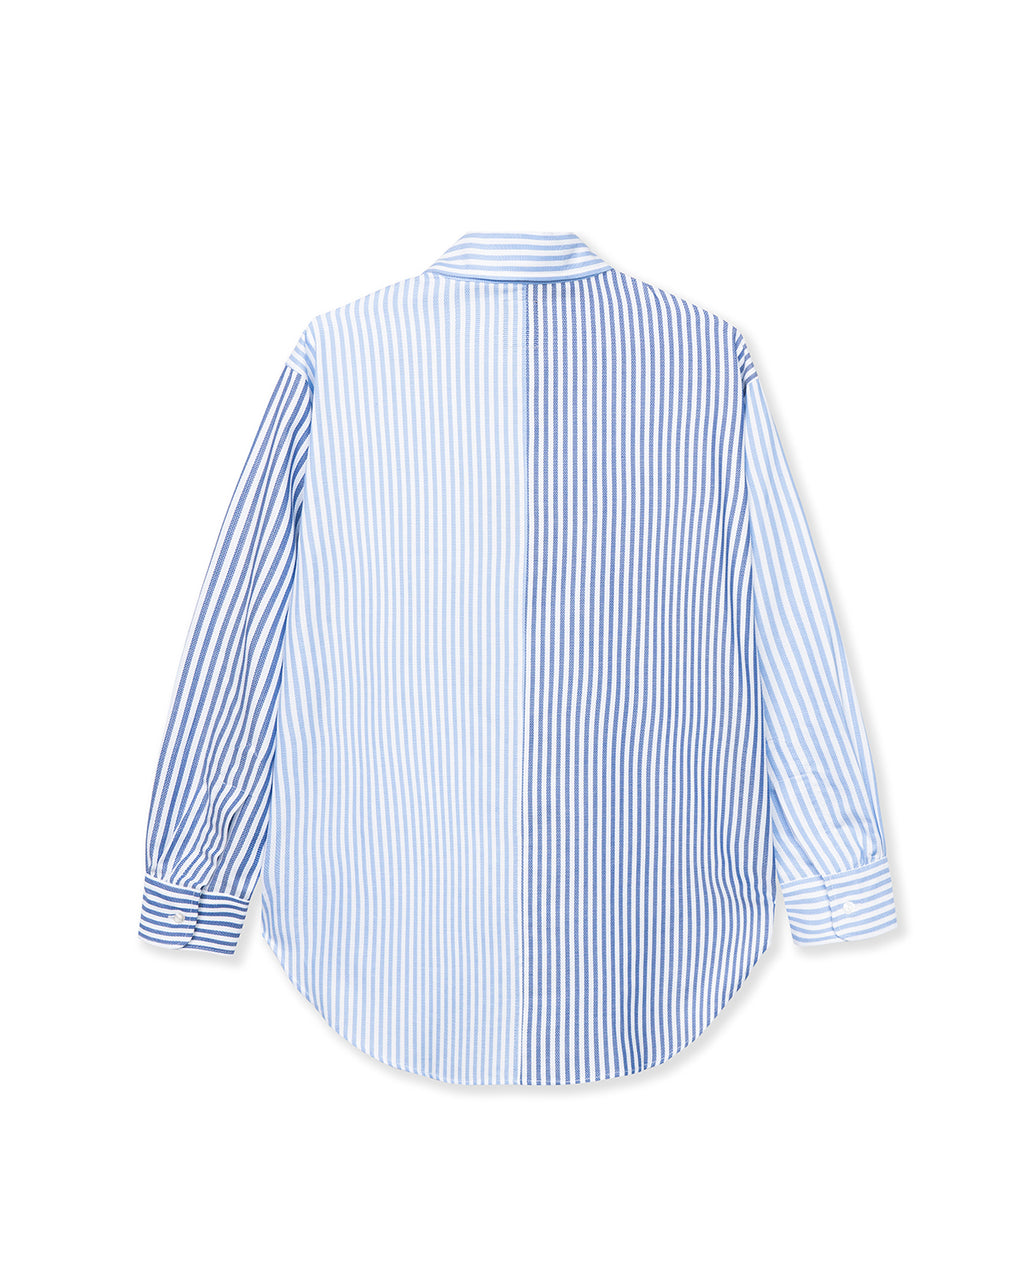 Sunflower Paneled Oxford Button Up Shirting - Blue / white 3